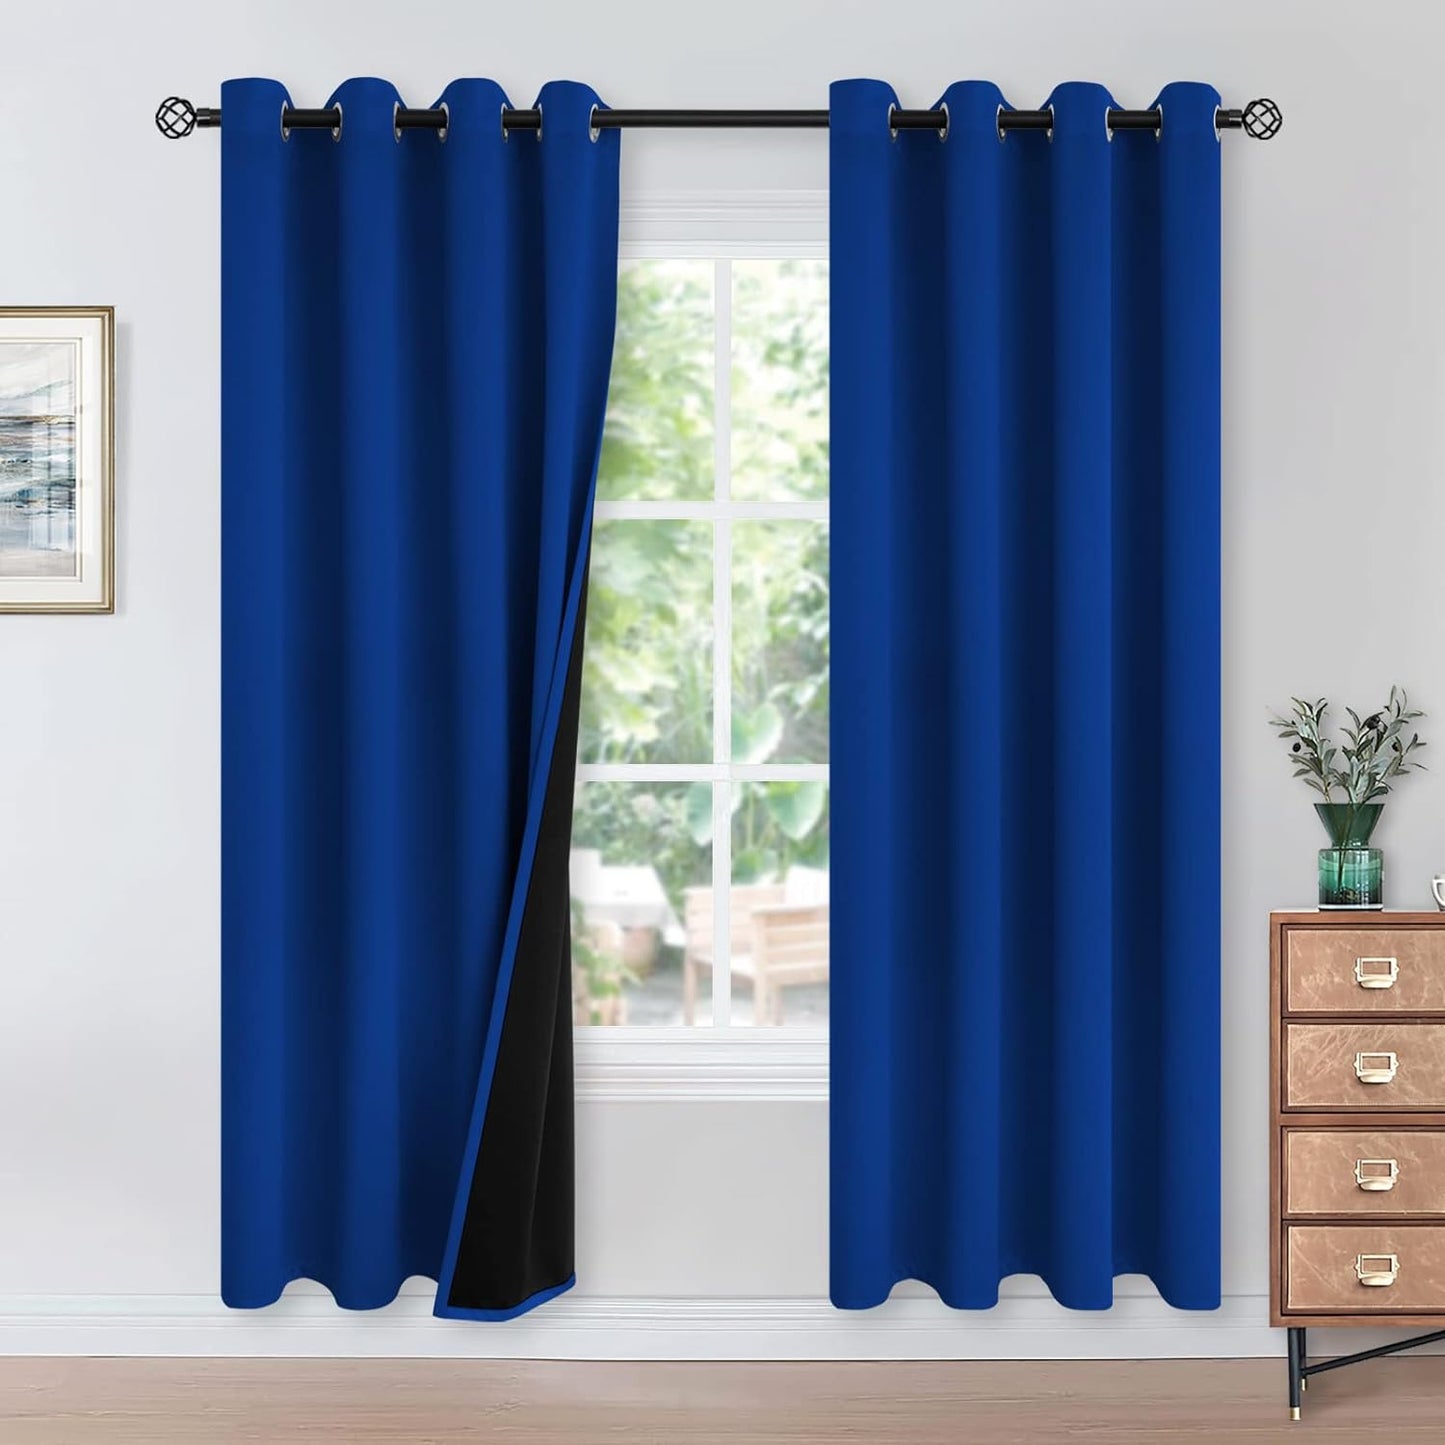 Youngstex Black 100% Blackout Curtains 63 Inches for Bedroom Thermal Insulated Total Room Darkening Curtains for Living Room Window with Black Back Grommet, 2 Panels, 42 X 63 Inch  YoungsTex Royal Blue 52W X 84L 